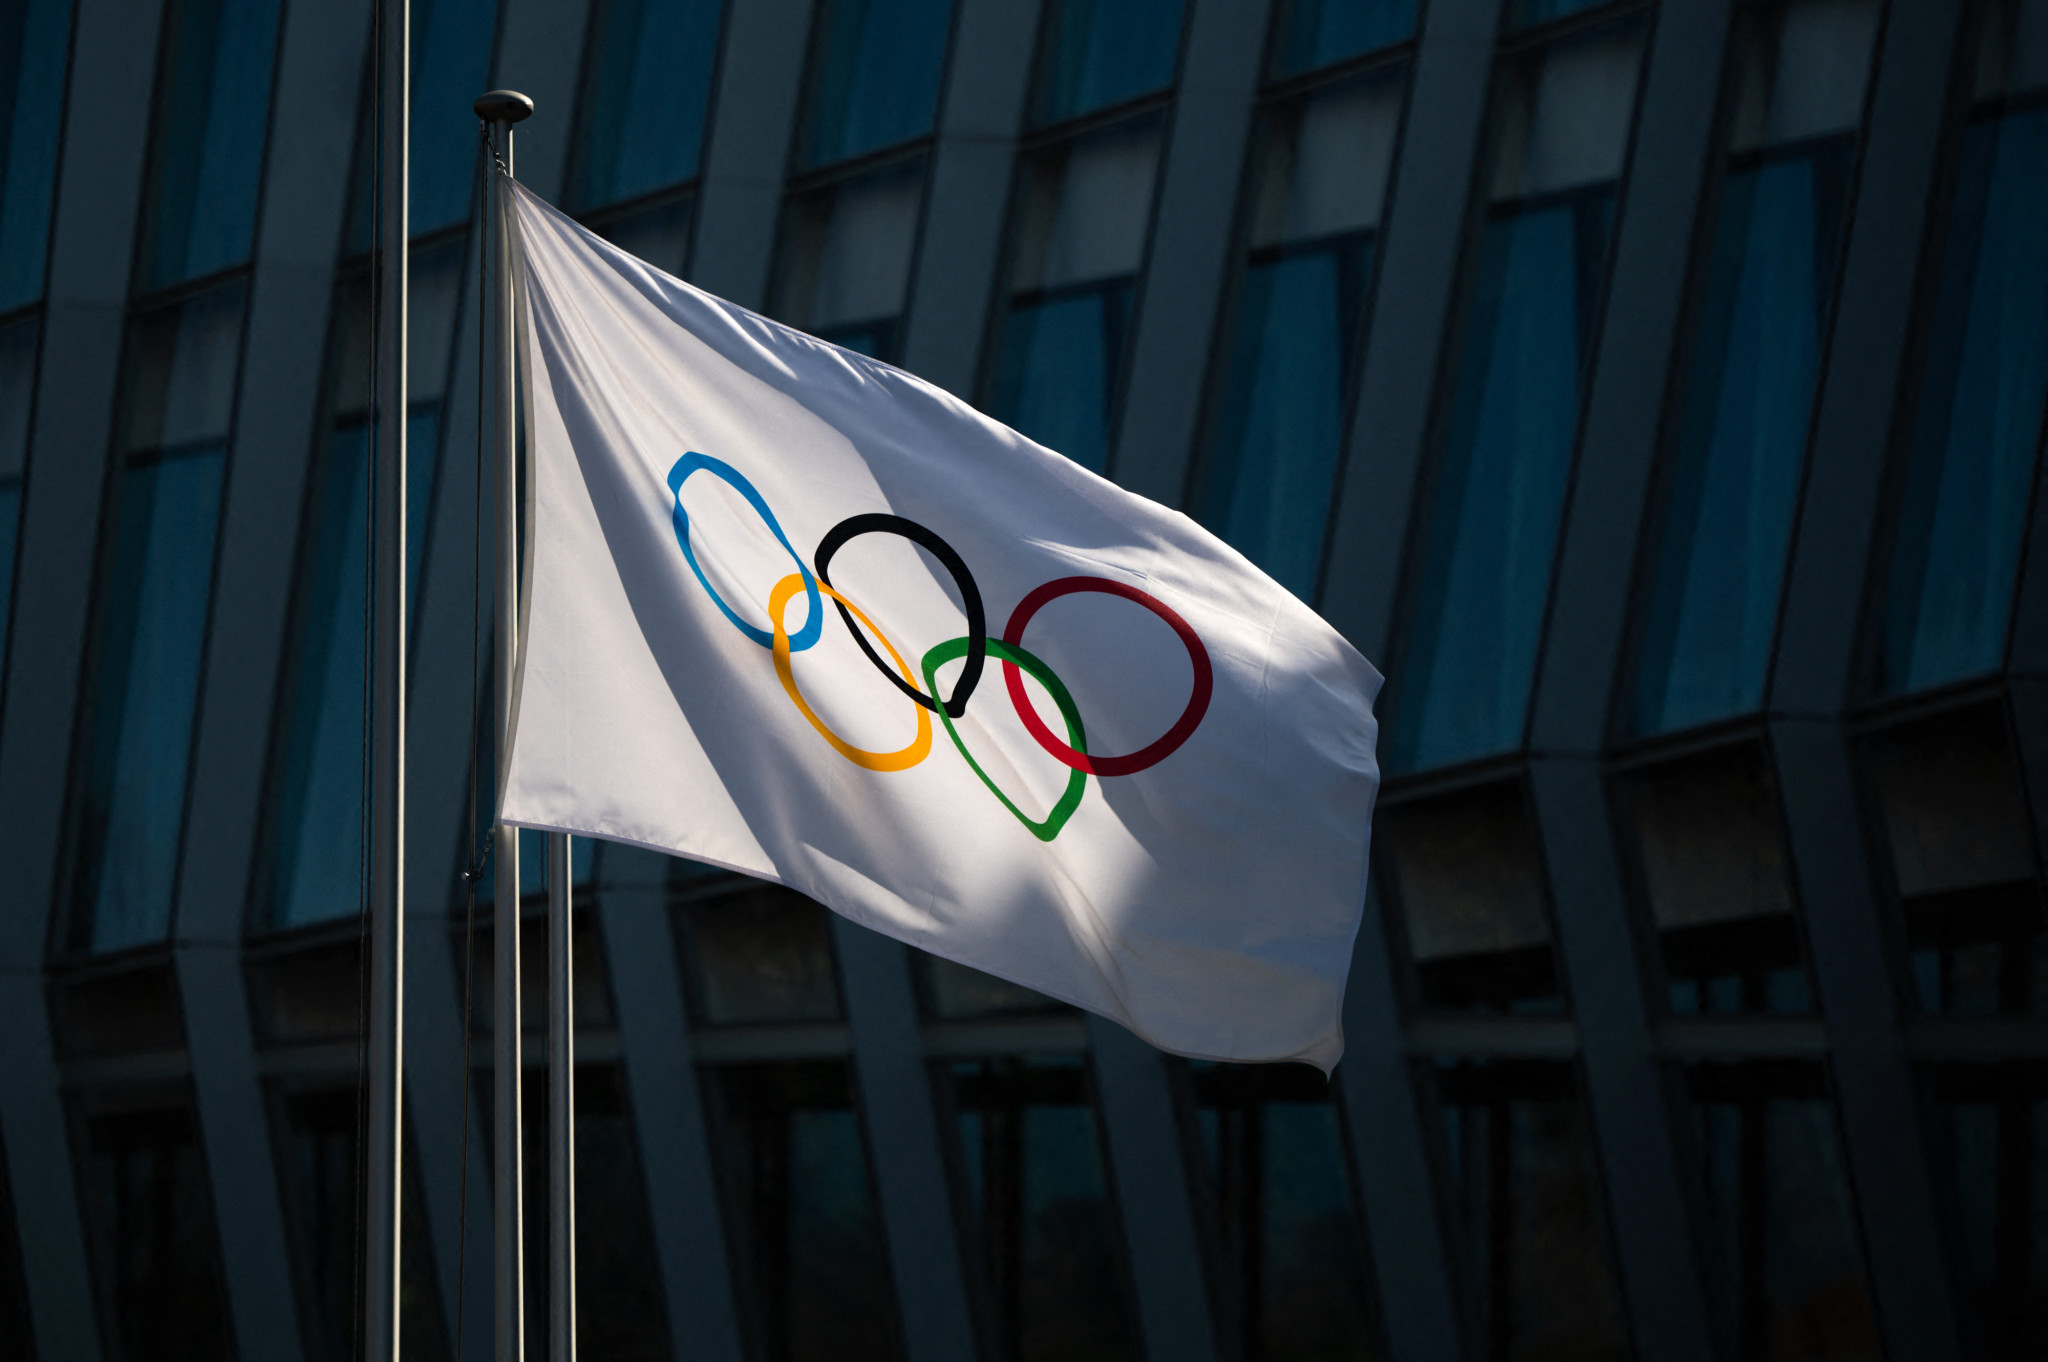 Activist groups call on IOC to adopt human rights laws across all operations